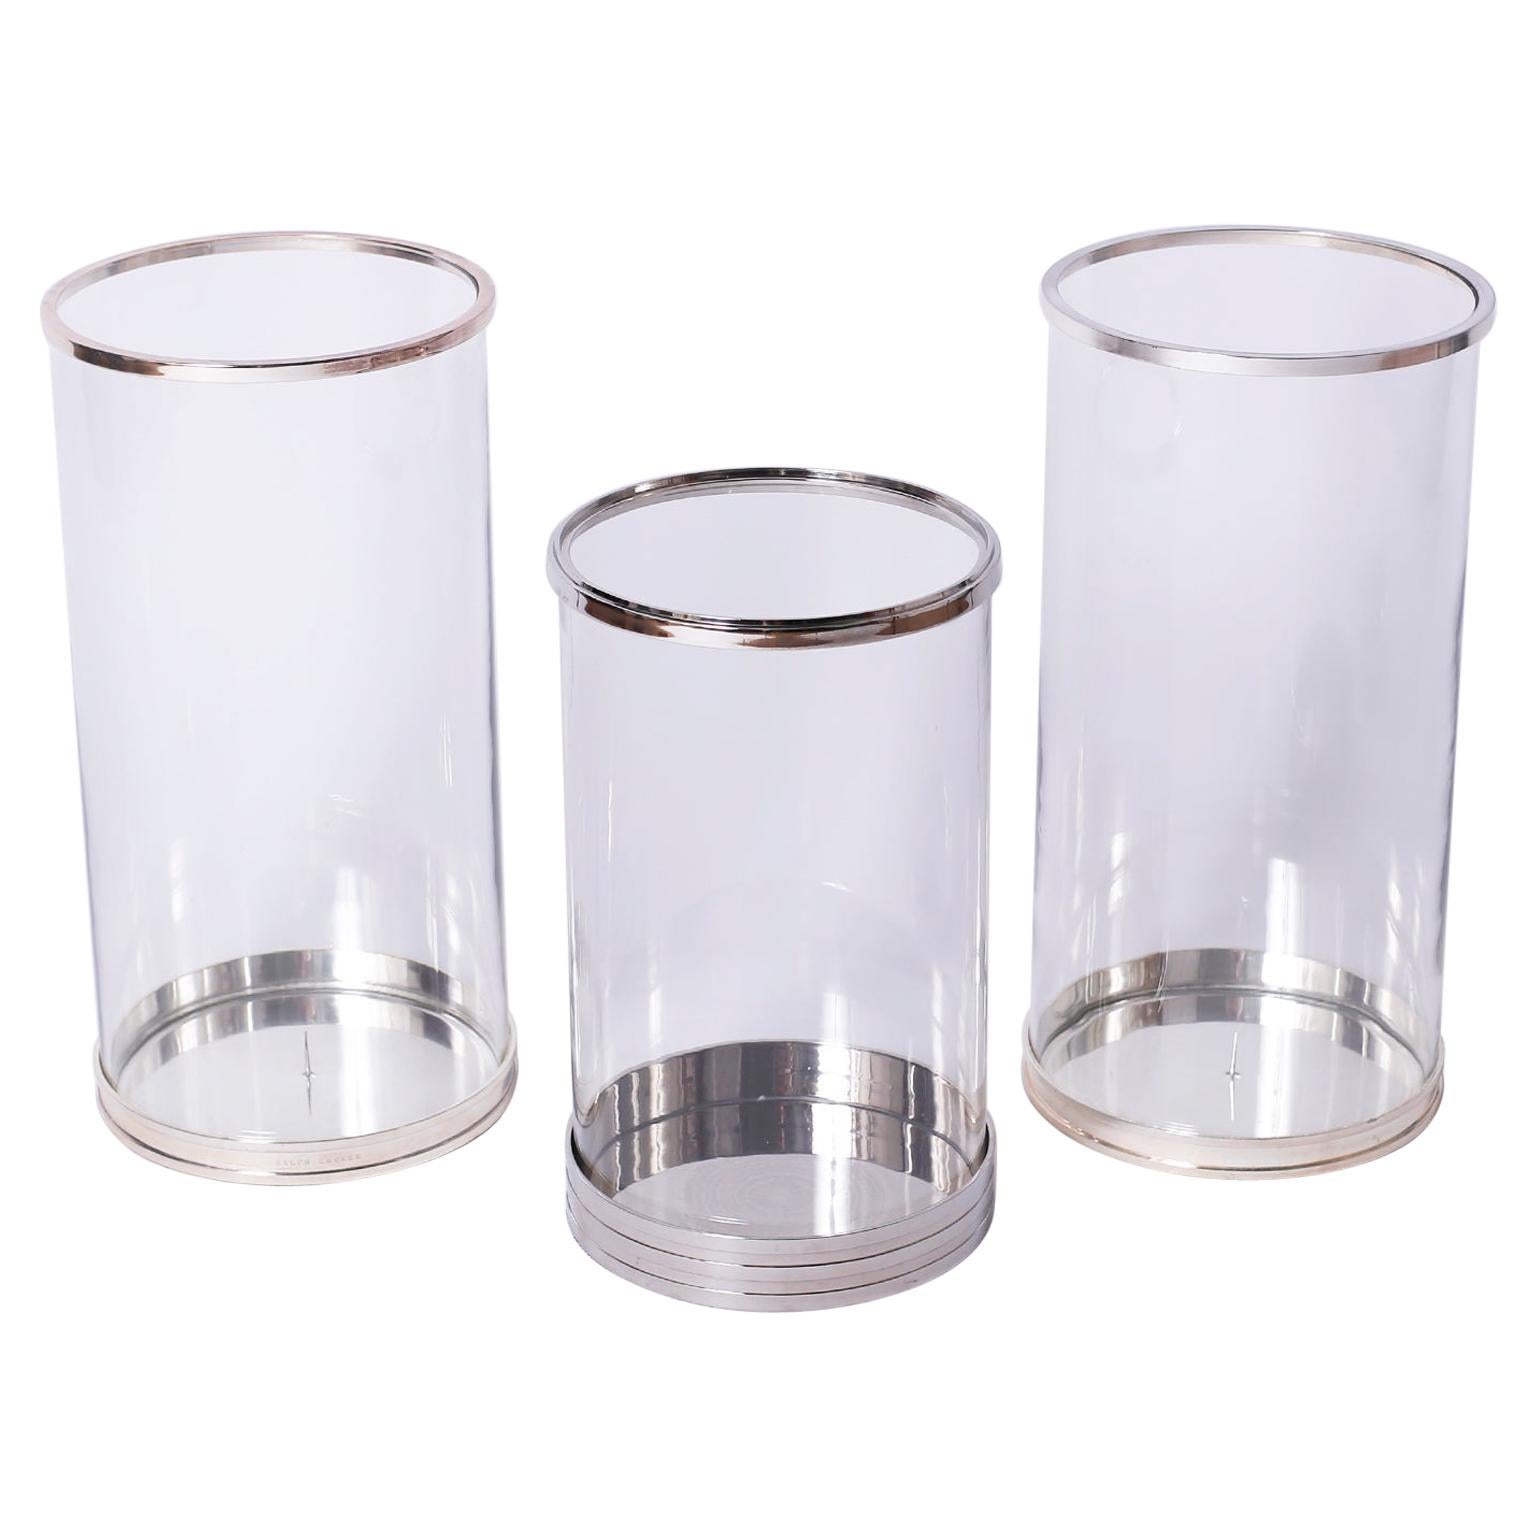 Three Hurricane Candle Stands